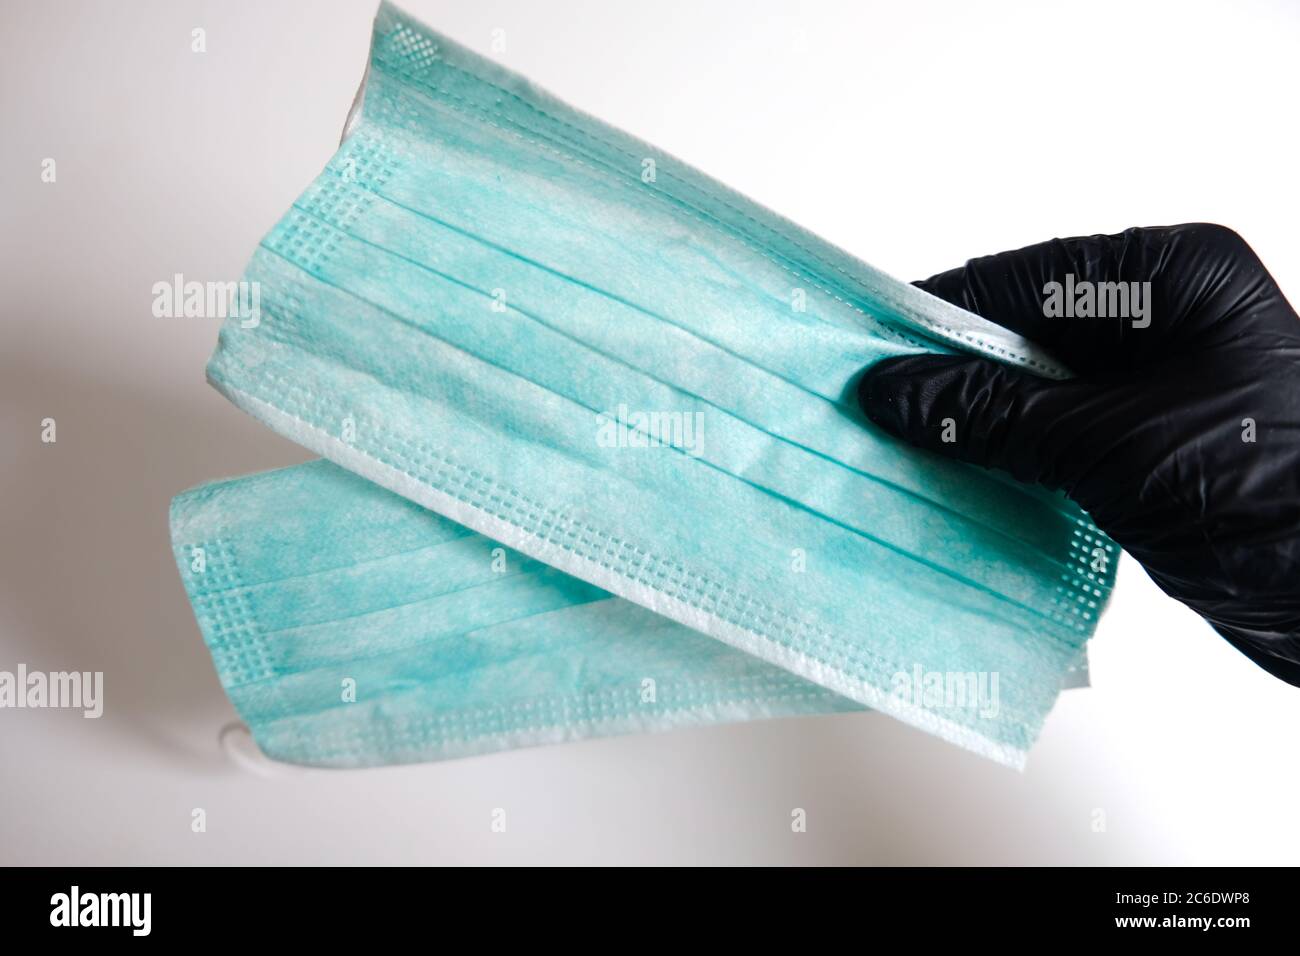 Hand in black glove holding a pair of face masks. Healthy measures to prevent virus spreading. Take the medical protection mask to flatten the curve Stock Photo